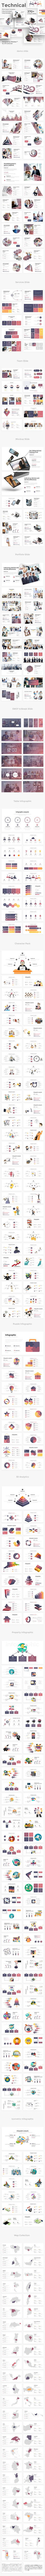 Technical Fully Animated Pitch Deck Powerpoint Template